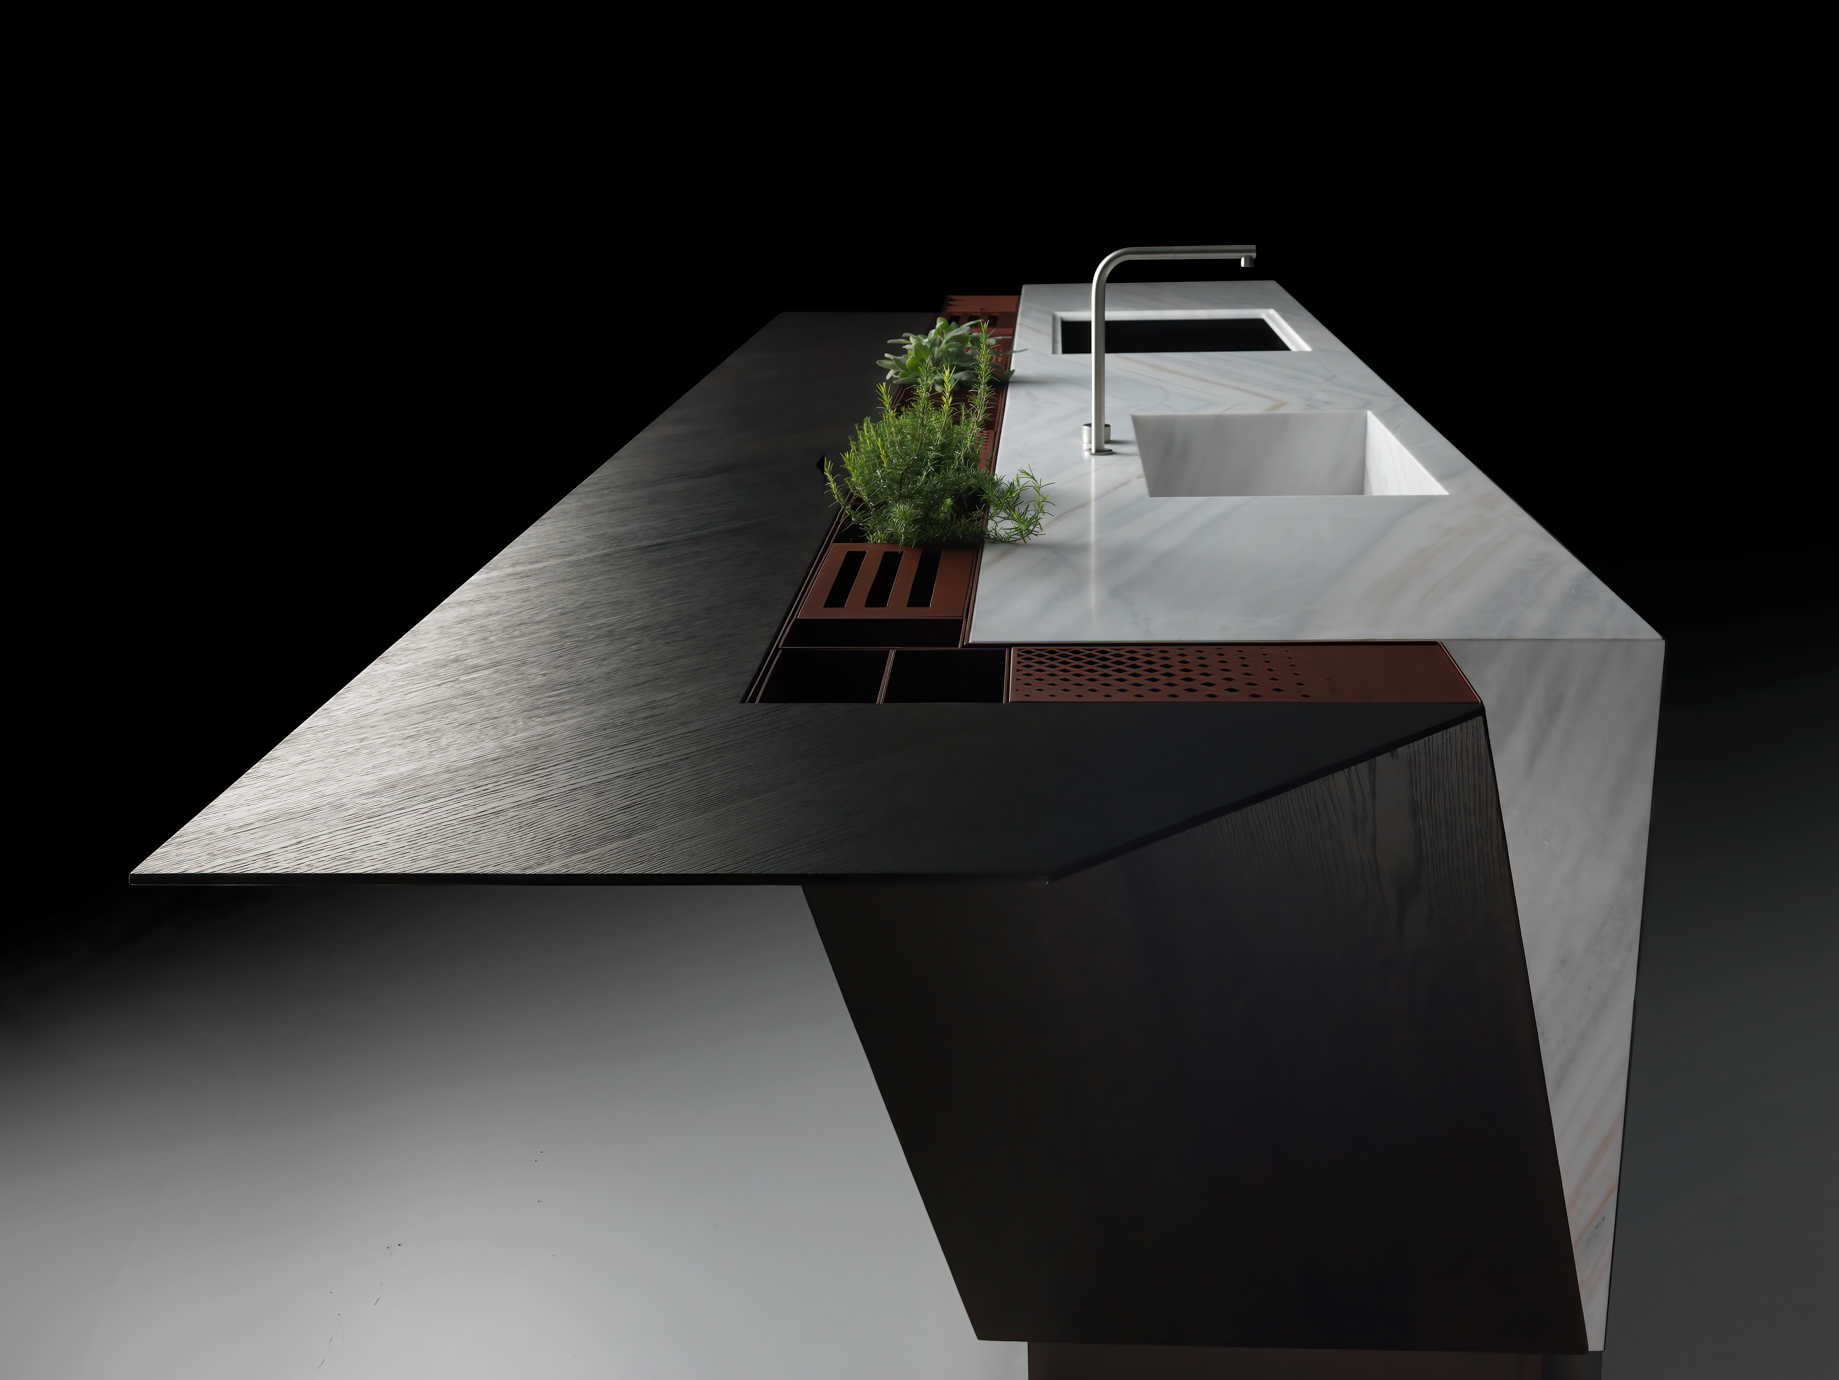 EGO Kitchen The Cut by Record è Cucine Milan, Italy – Alessandro Isola